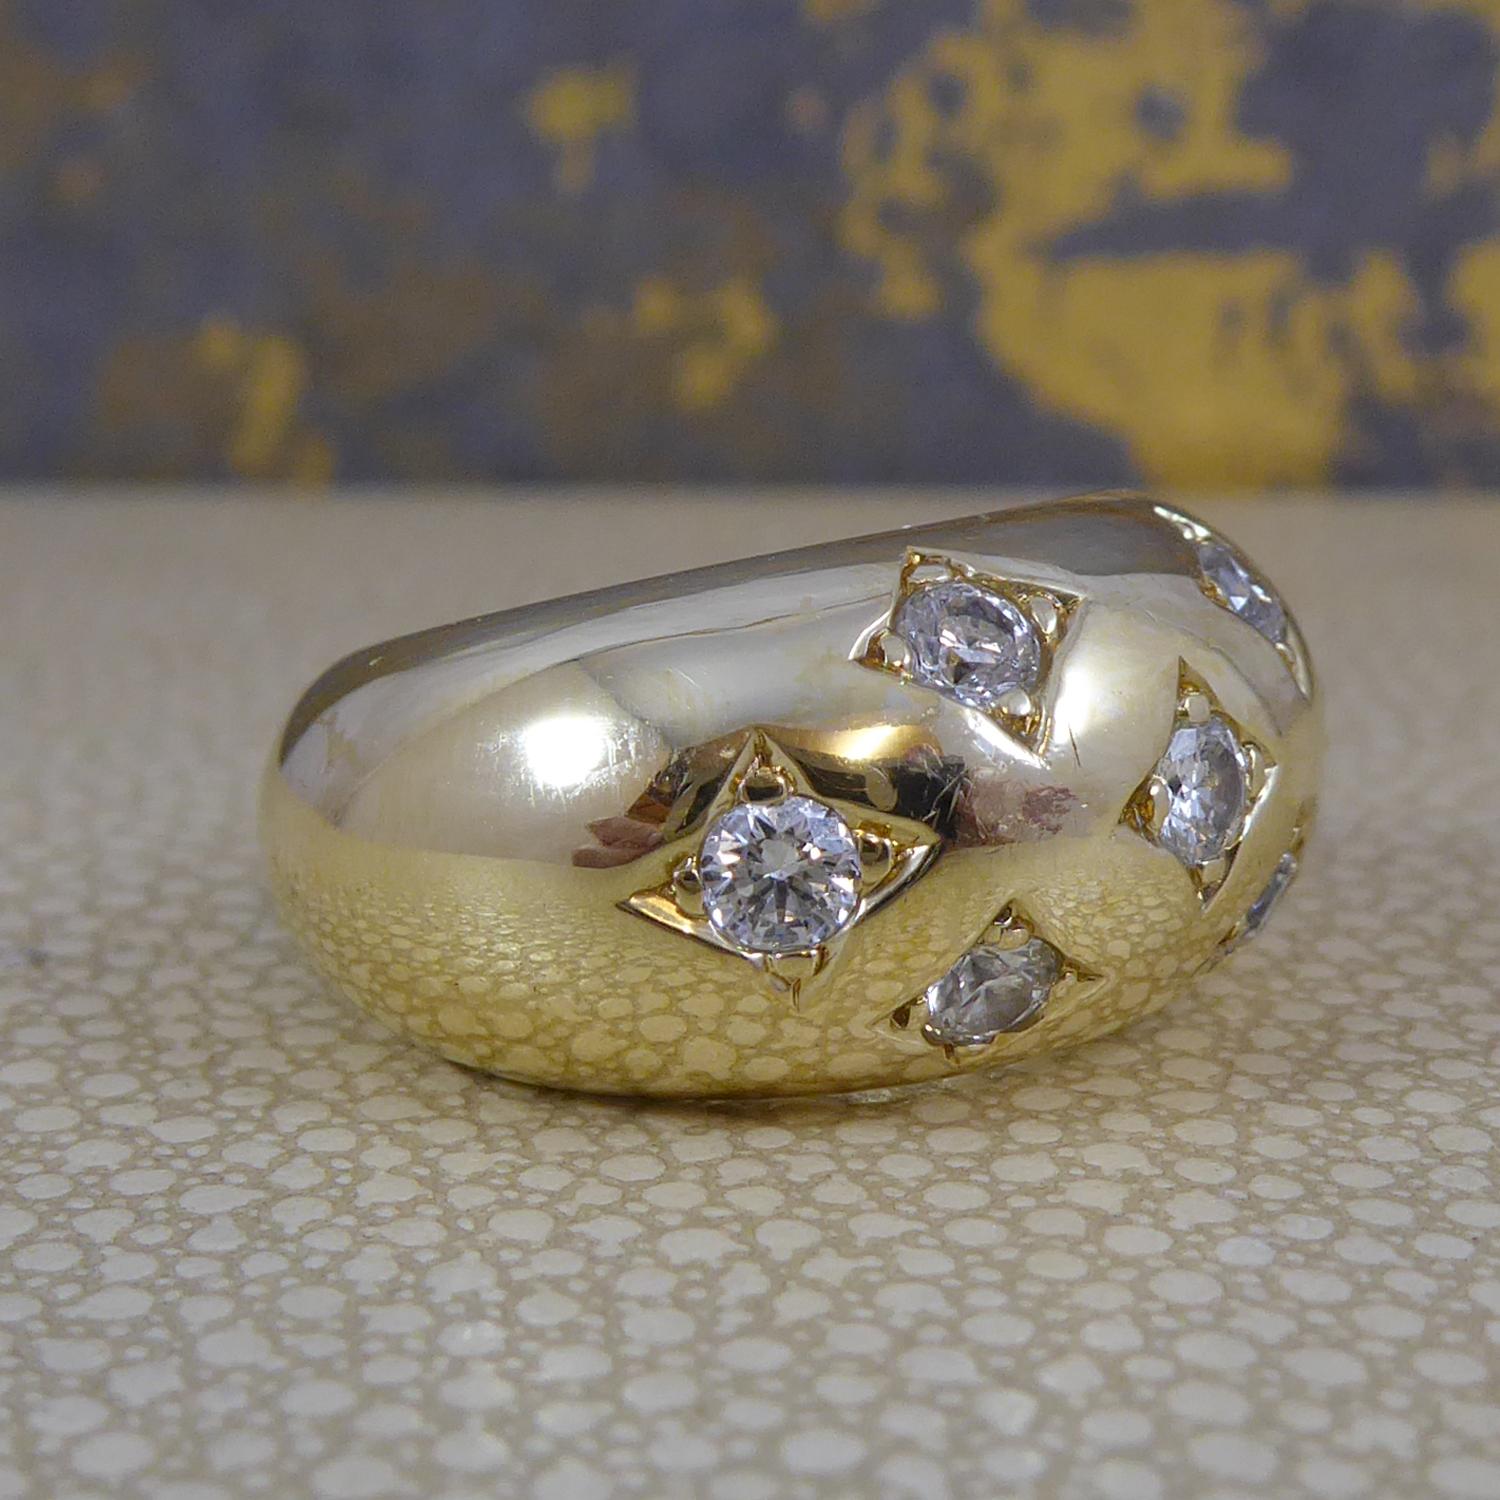 A fabulous bold design ring dating from the late 20th Century.  A polished dome of 18ct yellow gold scatter set with seven brilliant cut diamonds measuring approx. 3.00mm diameter and combiniing to give a total carat weight of 0.75ct.  All claw set